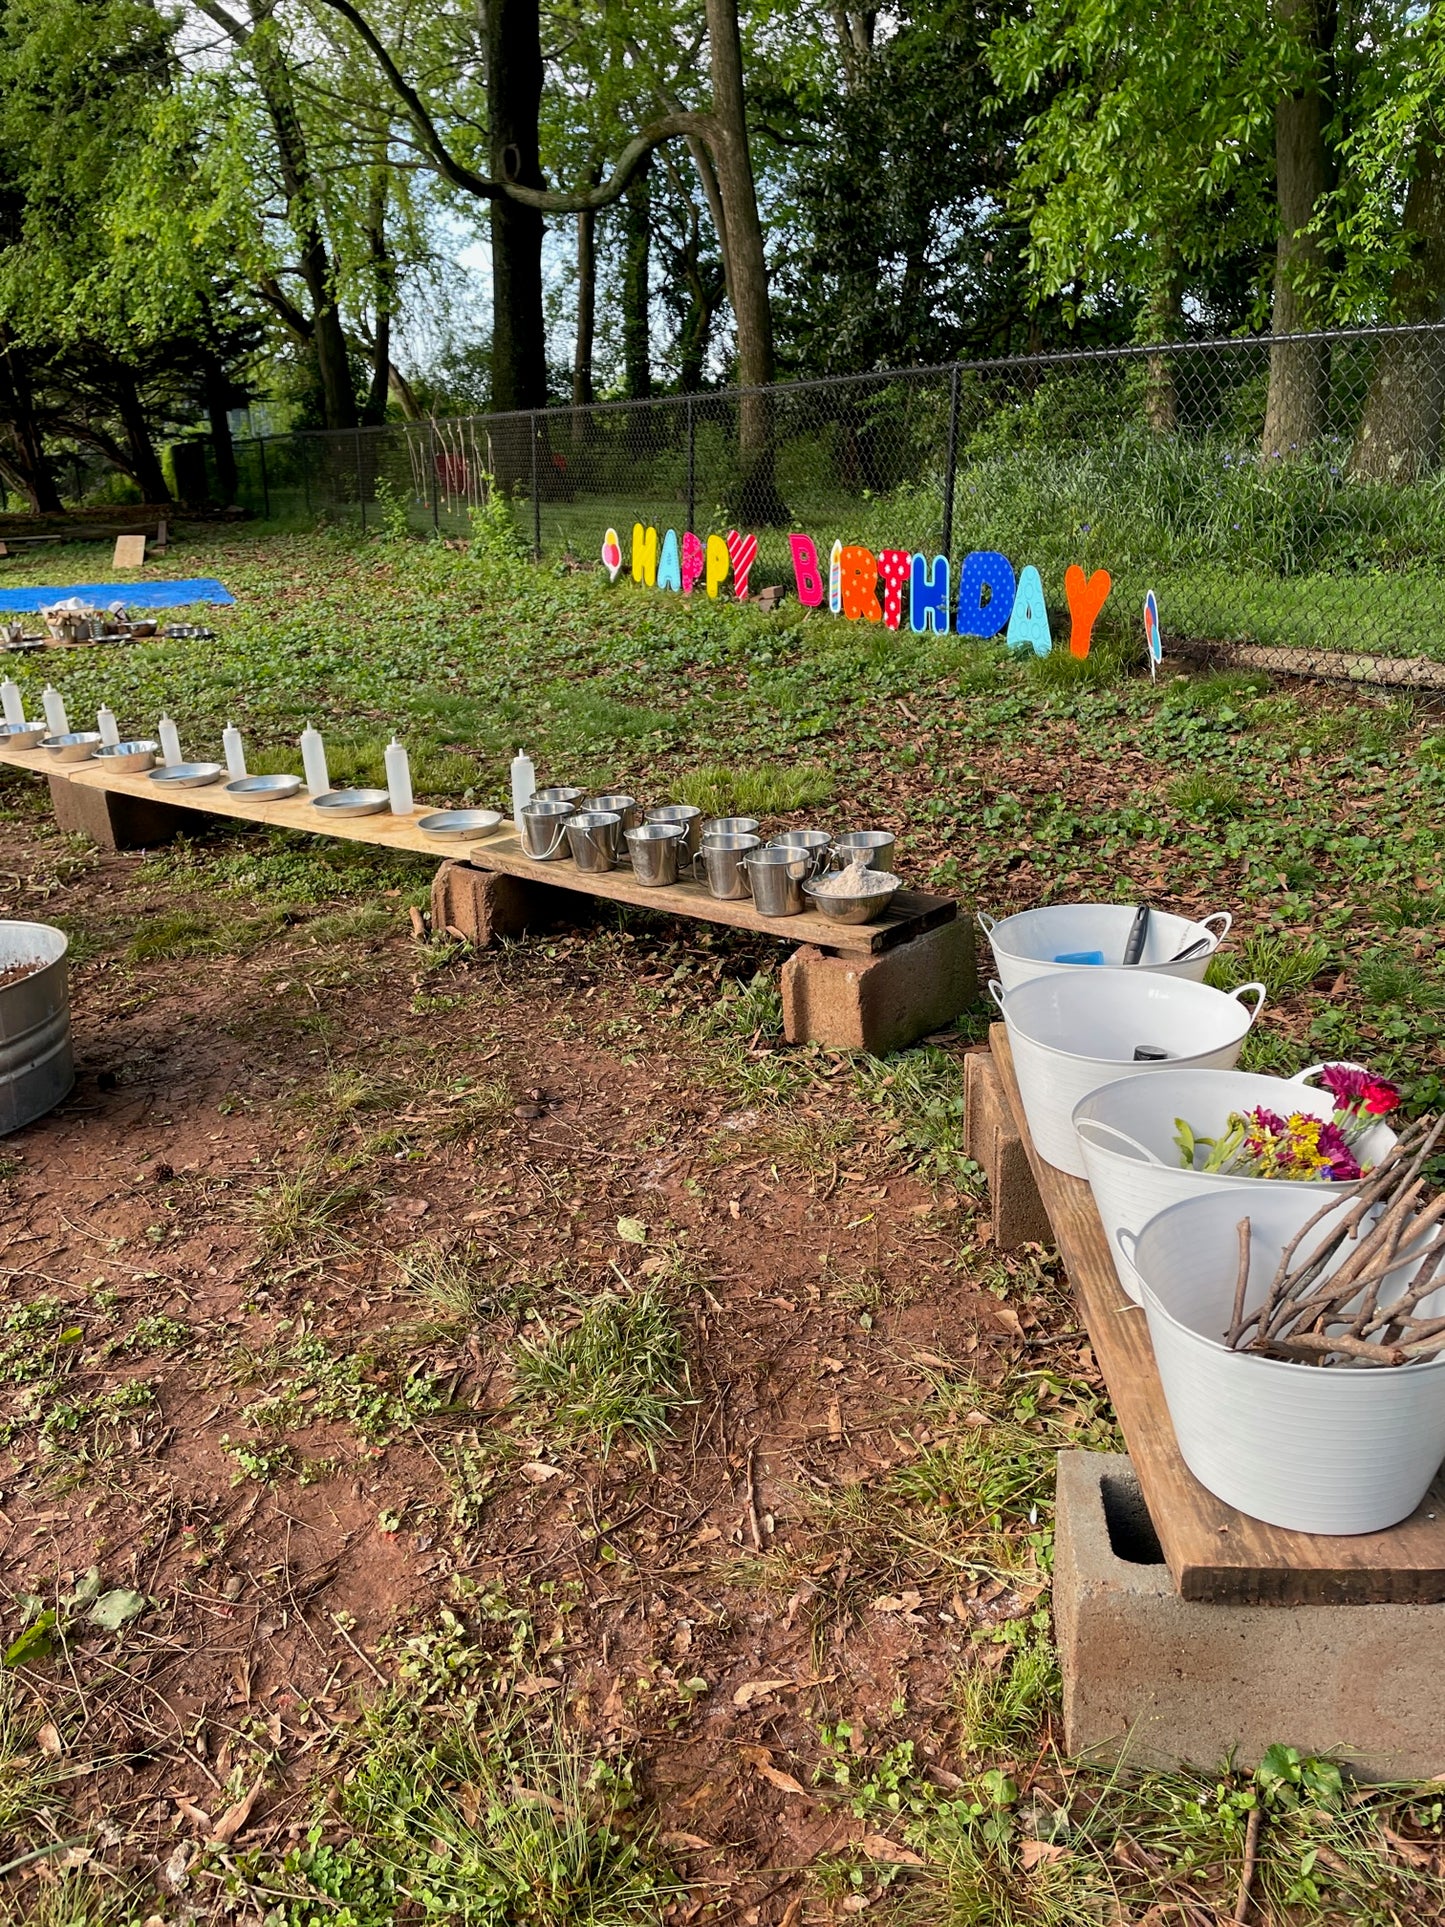 Our birthday setup will include multiple activities for children to enjoy. These will be customized for your group based on ages and interests. Mud pies. Painting. Bubbles. More!